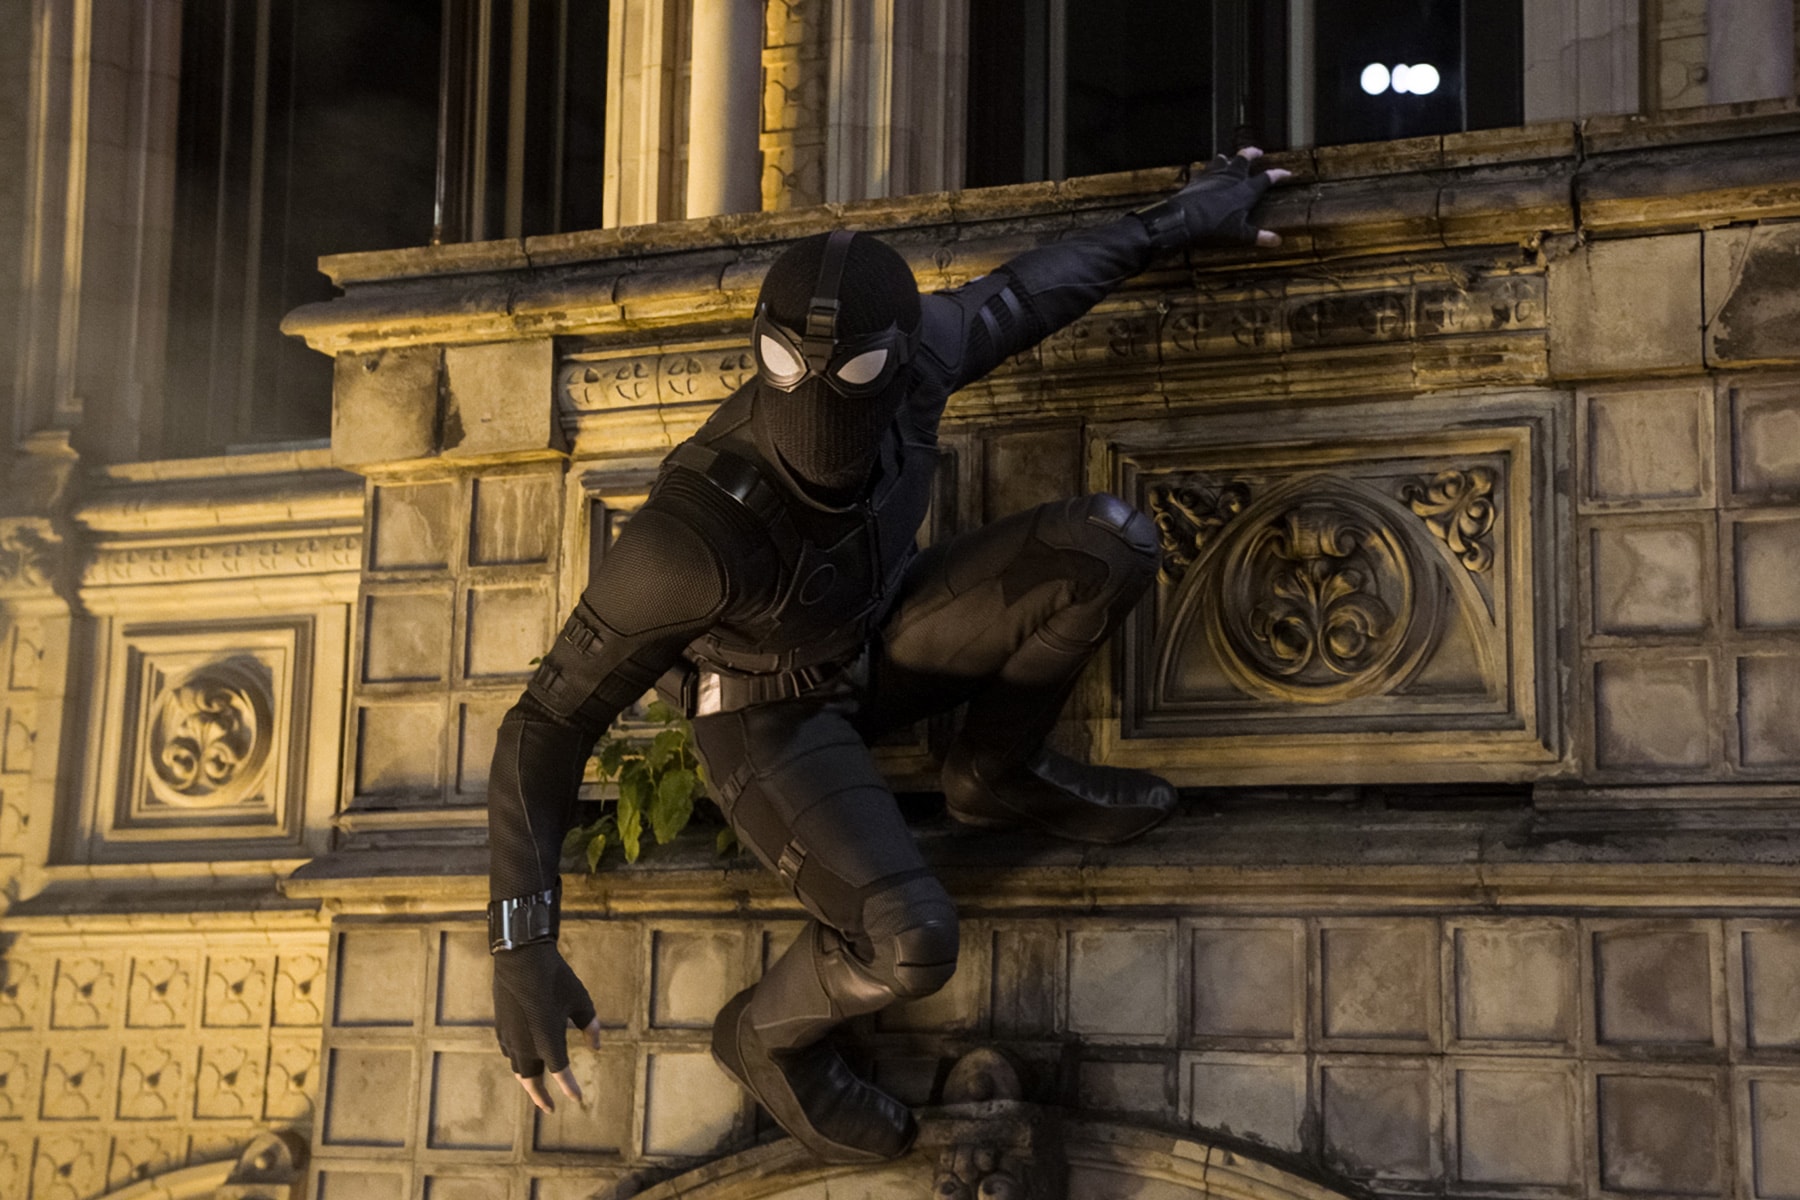 Spider-Man: Far From Home Stealth Suit Spotlighted in New Posters & Video sony pictures marvel studios tom holland iron man marvel cinematic universe